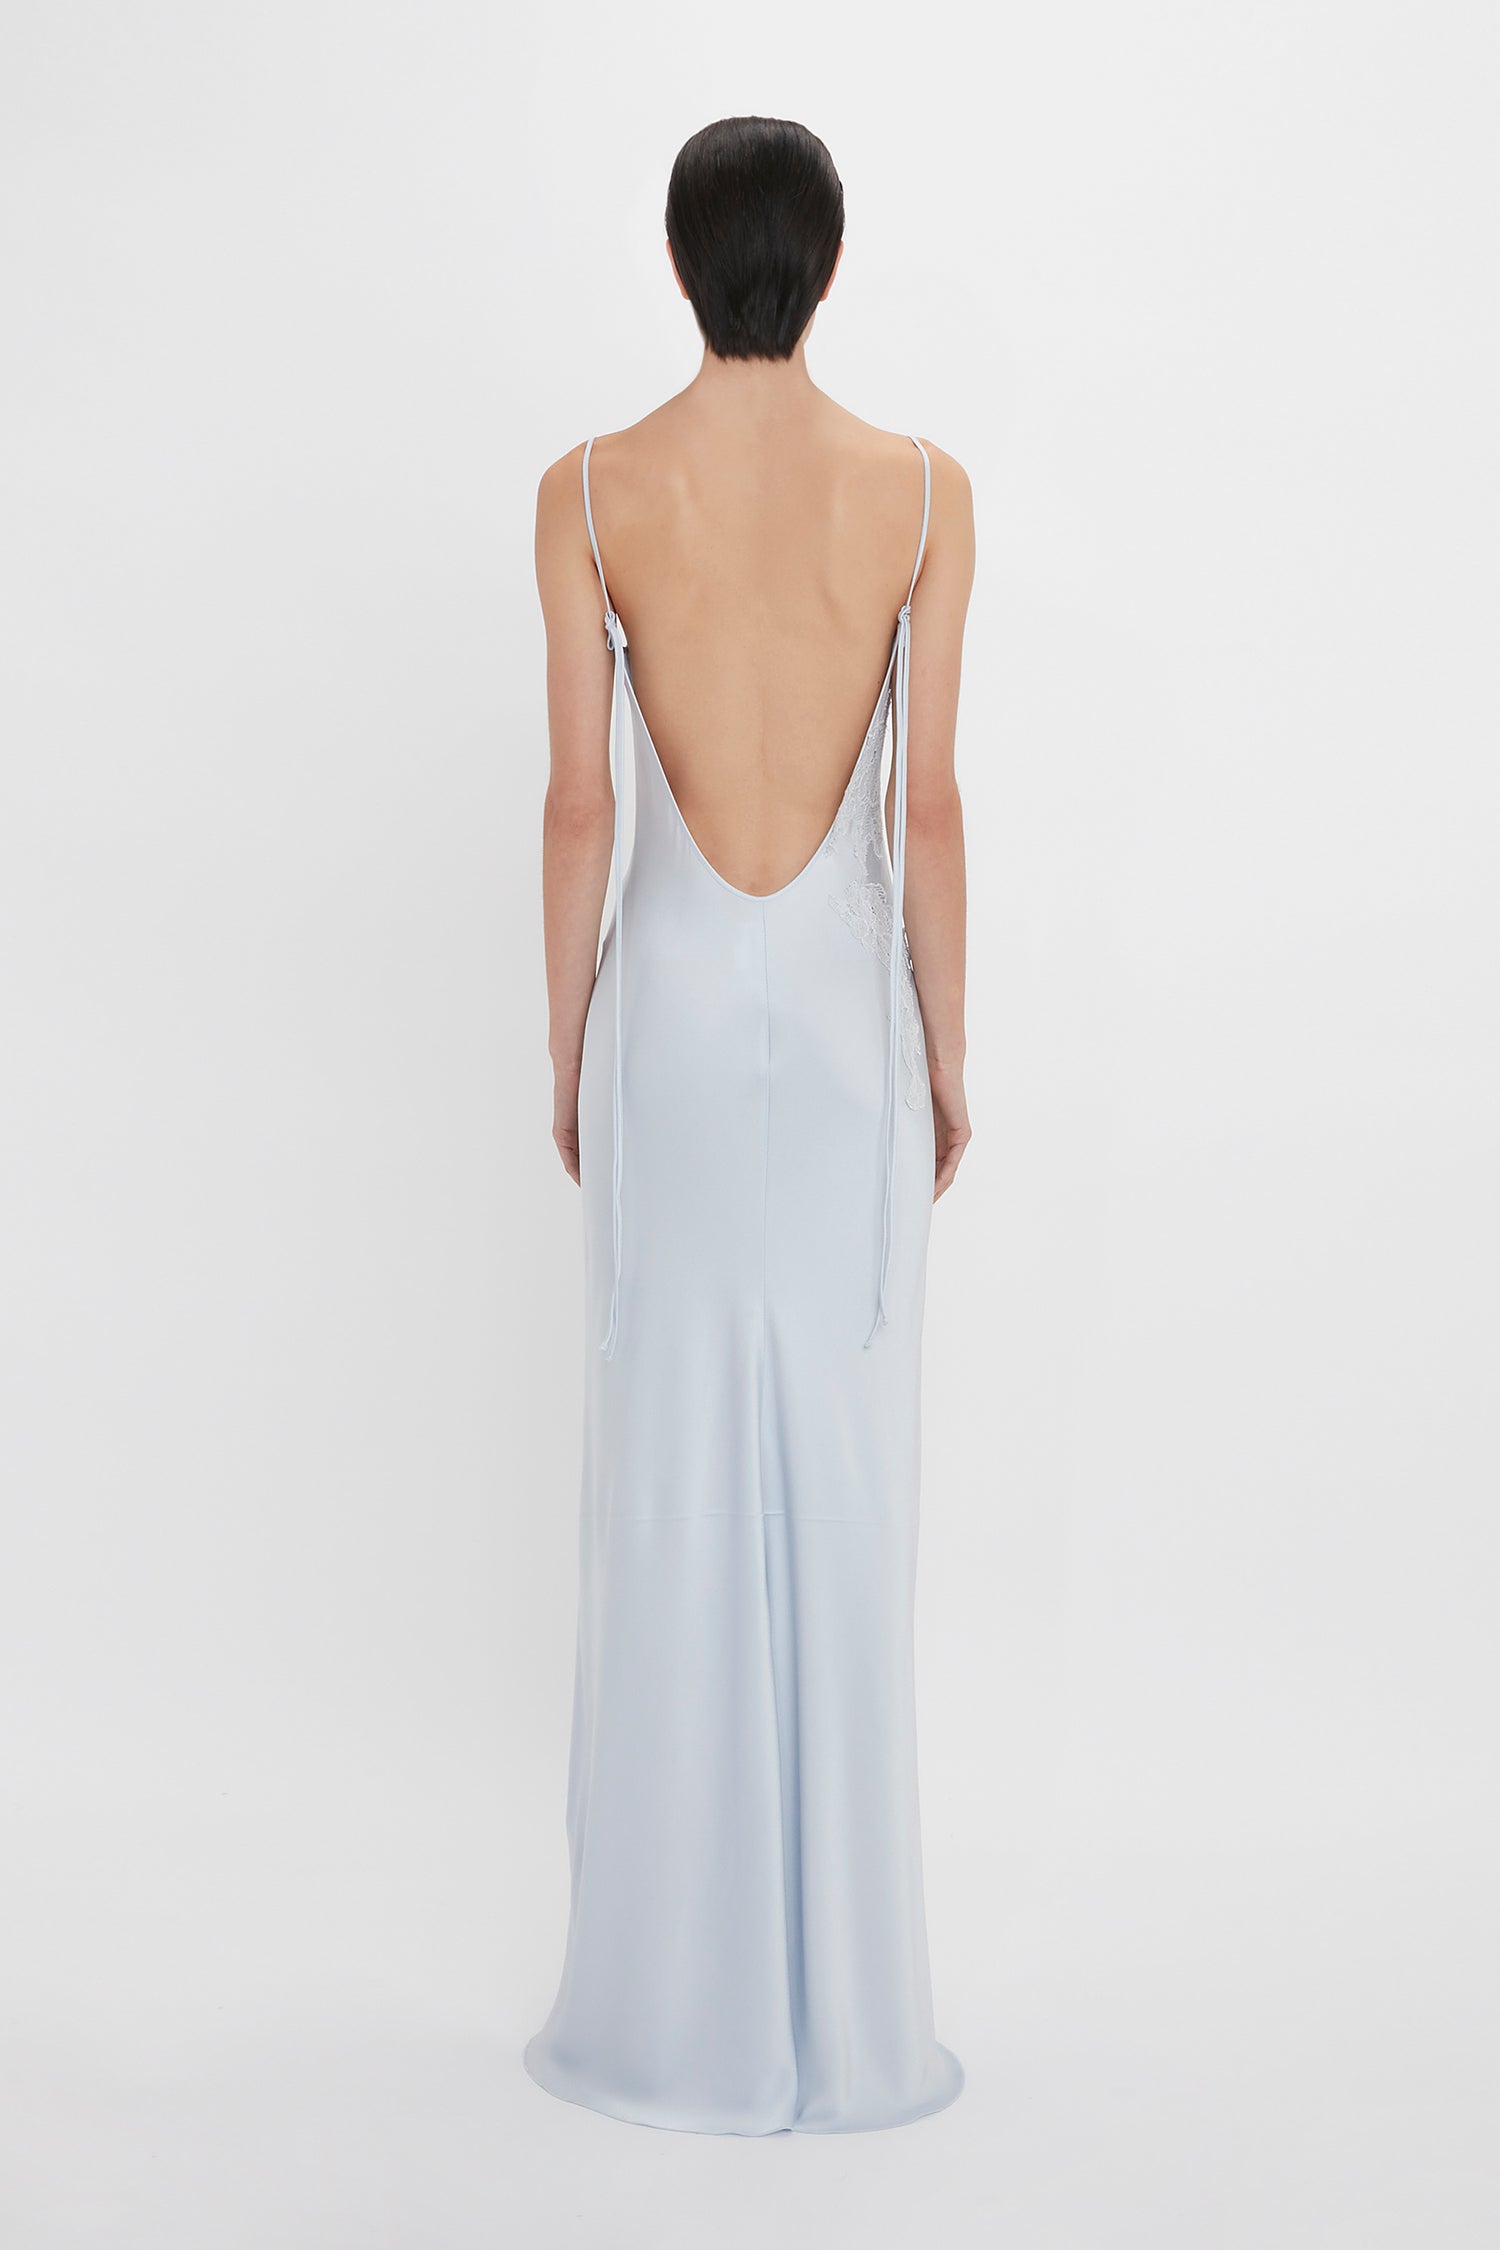 A woman facing away wearing a Victoria Beckham Exclusive Lace Detail Floor-Length Cami Dress In Ice, with a low-cut back and thin straps, on a plain white background.